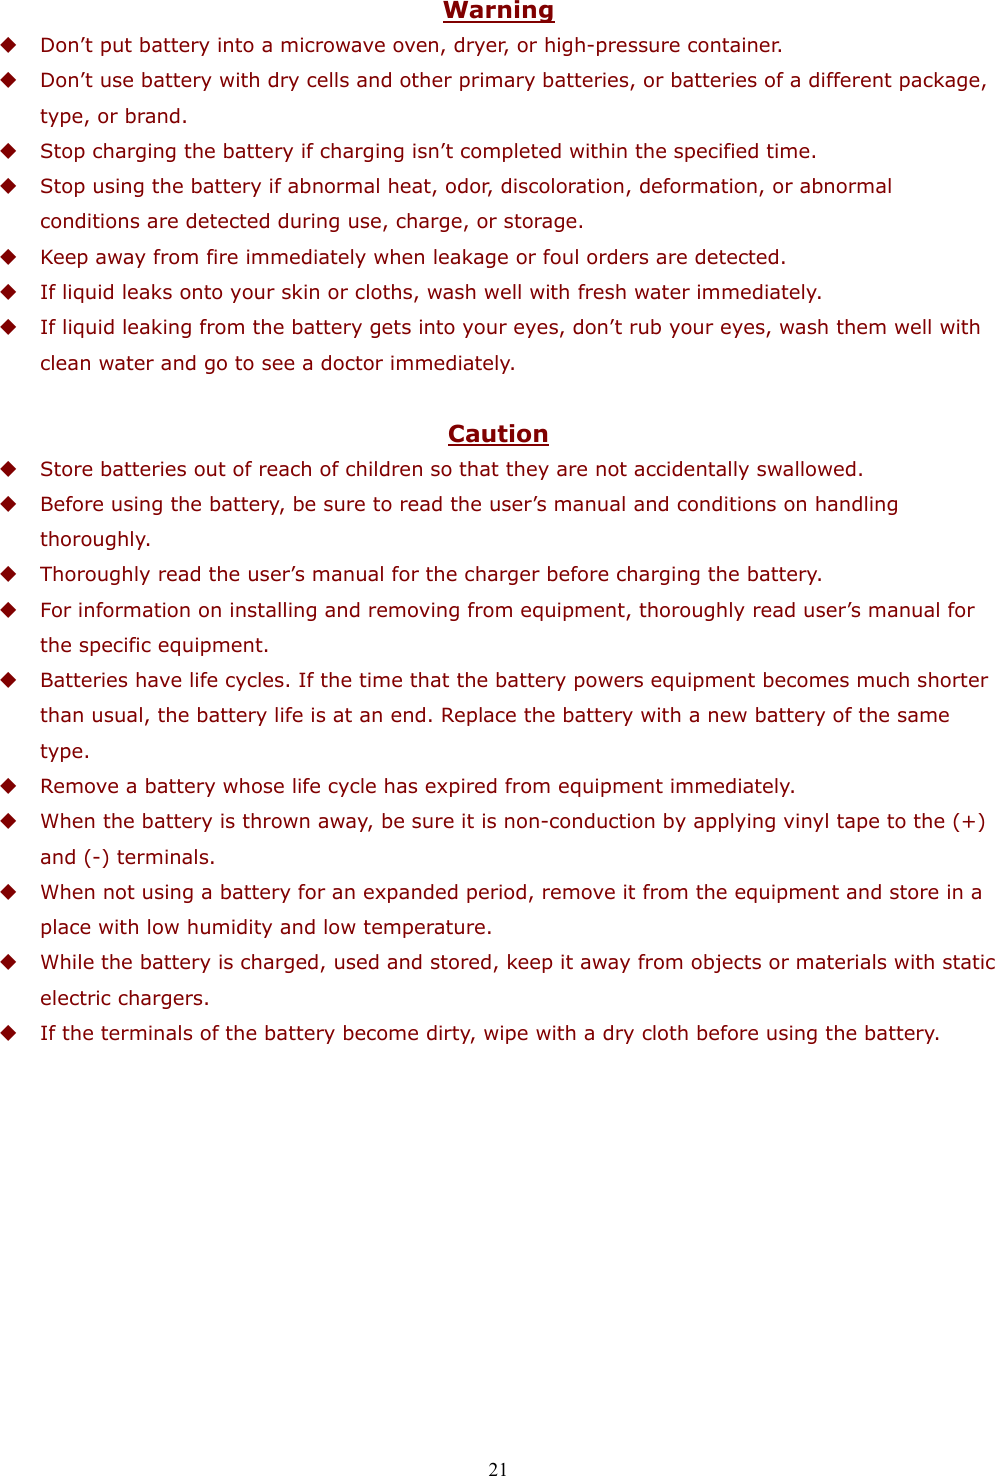  21 Warning  Don’t put battery into a microwave oven, dryer, or high-pressure container.  Don’t use battery with dry cells and other primary batteries, or batteries of a different package, type, or brand.  Stop charging the battery if charging isn’t completed within the specified time.  Stop using the battery if abnormal heat, odor, discoloration, deformation, or abnormal conditions are detected during use, charge, or storage.  Keep away from fire immediately when leakage or foul orders are detected.  If liquid leaks onto your skin or cloths, wash well with fresh water immediately.  If liquid leaking from the battery gets into your eyes, don’t rub your eyes, wash them well with clean water and go to see a doctor immediately.  Caution  Store batteries out of reach of children so that they are not accidentally swallowed.  Before using the battery, be sure to read the user’s manual and conditions on handling thoroughly.  Thoroughly read the user’s manual for the charger before charging the battery.  For information on installing and removing from equipment, thoroughly read user’s manual for the specific equipment.  Batteries have life cycles. If the time that the battery powers equipment becomes much shorter than usual, the battery life is at an end. Replace the battery with a new battery of the same type.  Remove a battery whose life cycle has expired from equipment immediately.  When the battery is thrown away, be sure it is non-conduction by applying vinyl tape to the (+) and (-) terminals.  When not using a battery for an expanded period, remove it from the equipment and store in a place with low humidity and low temperature.  While the battery is charged, used and stored, keep it away from objects or materials with static electric chargers.  If the terminals of the battery become dirty, wipe with a dry cloth before using the battery.   